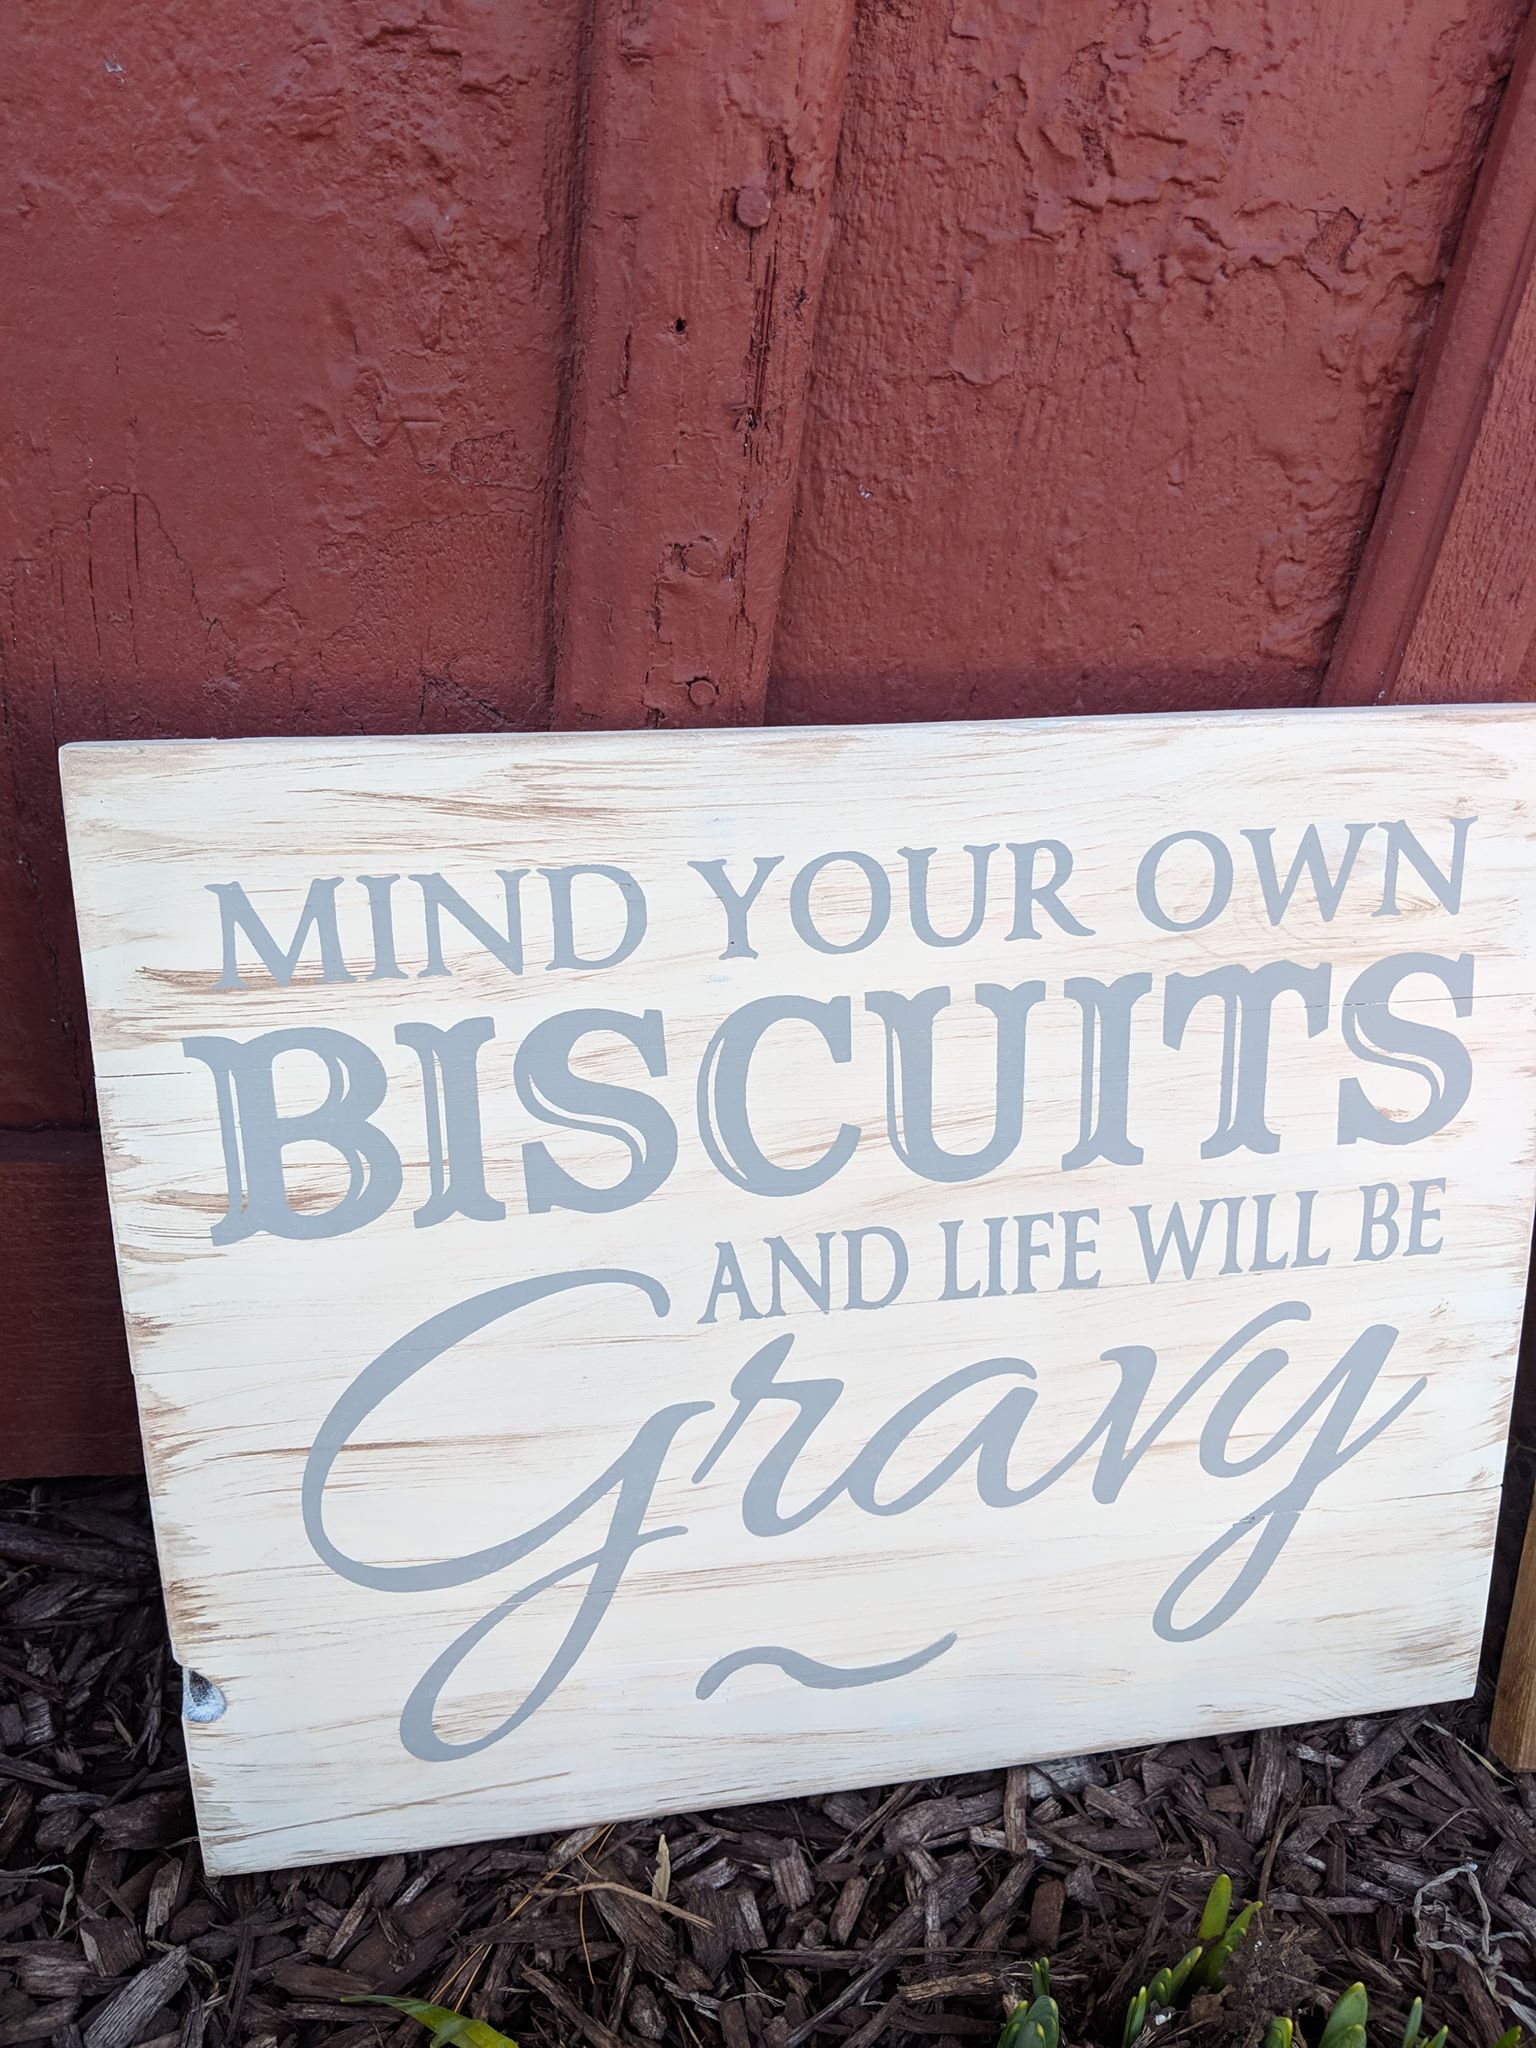 Mind your own biscuits and life will be gravy